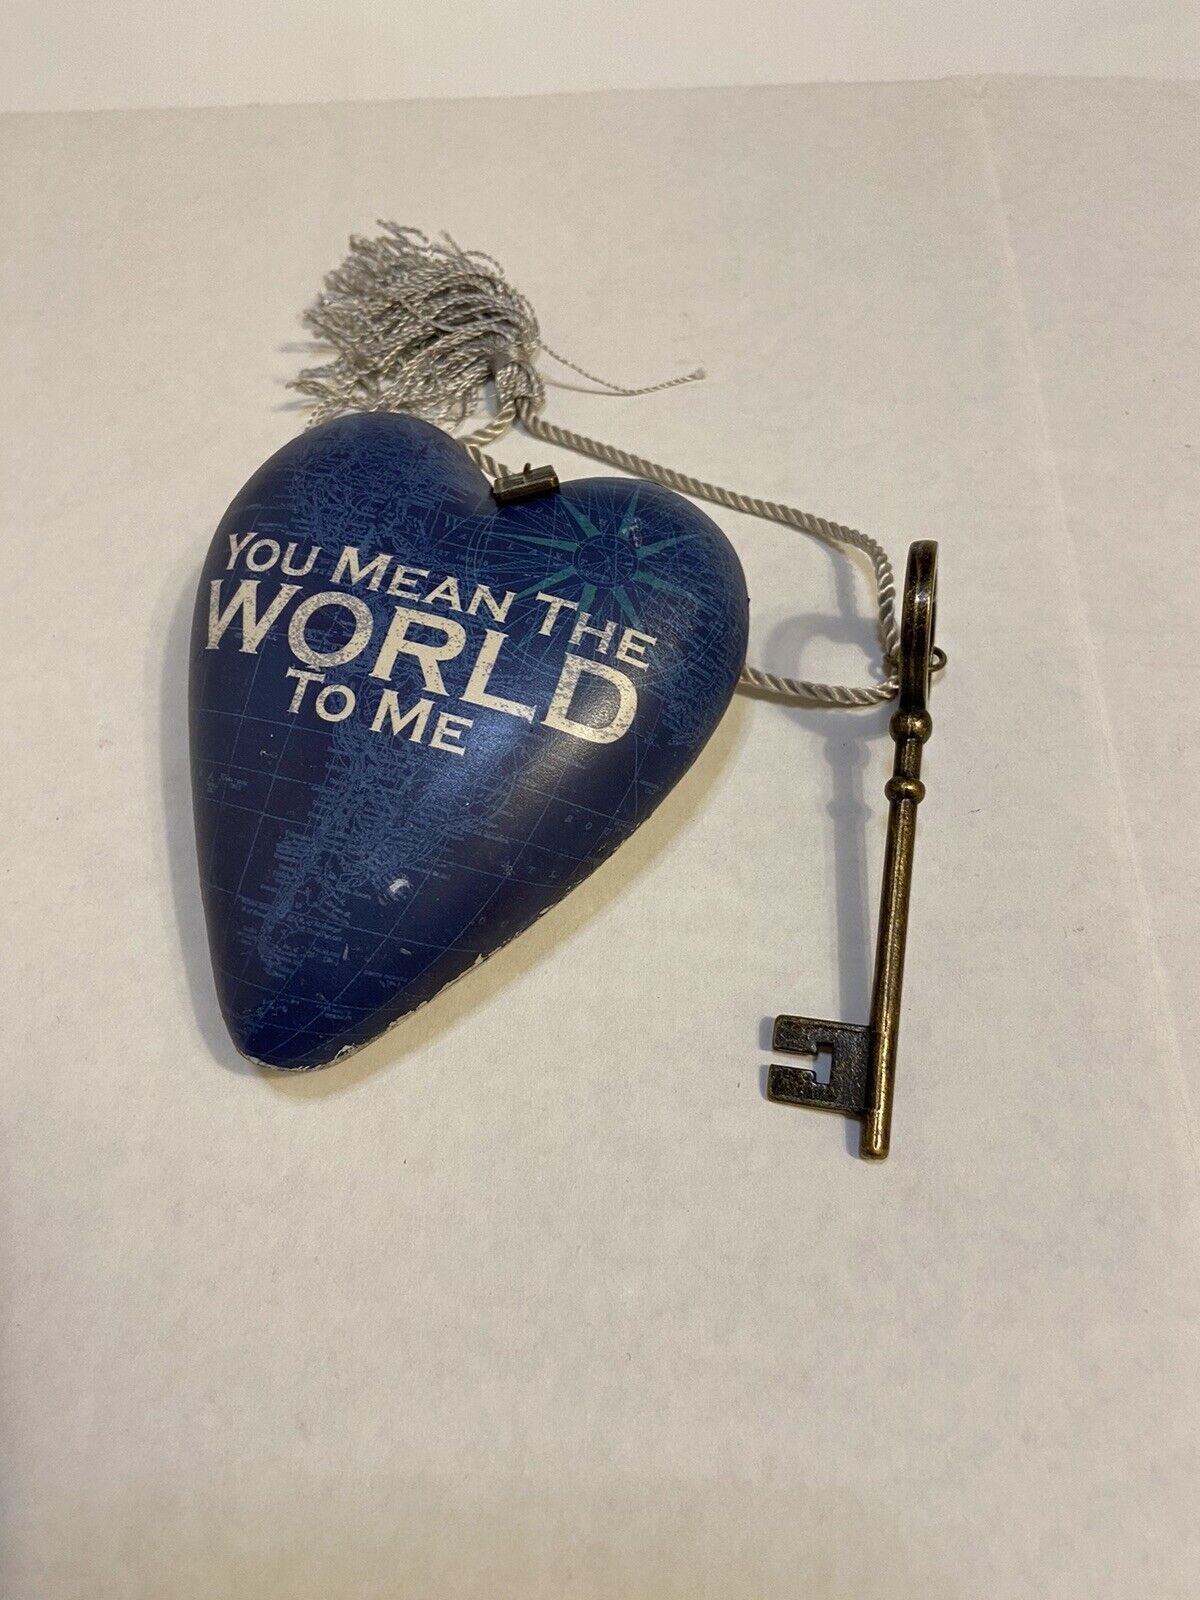 You Mean The World To Me Heart With Key And Hanger 3”x4” Heart